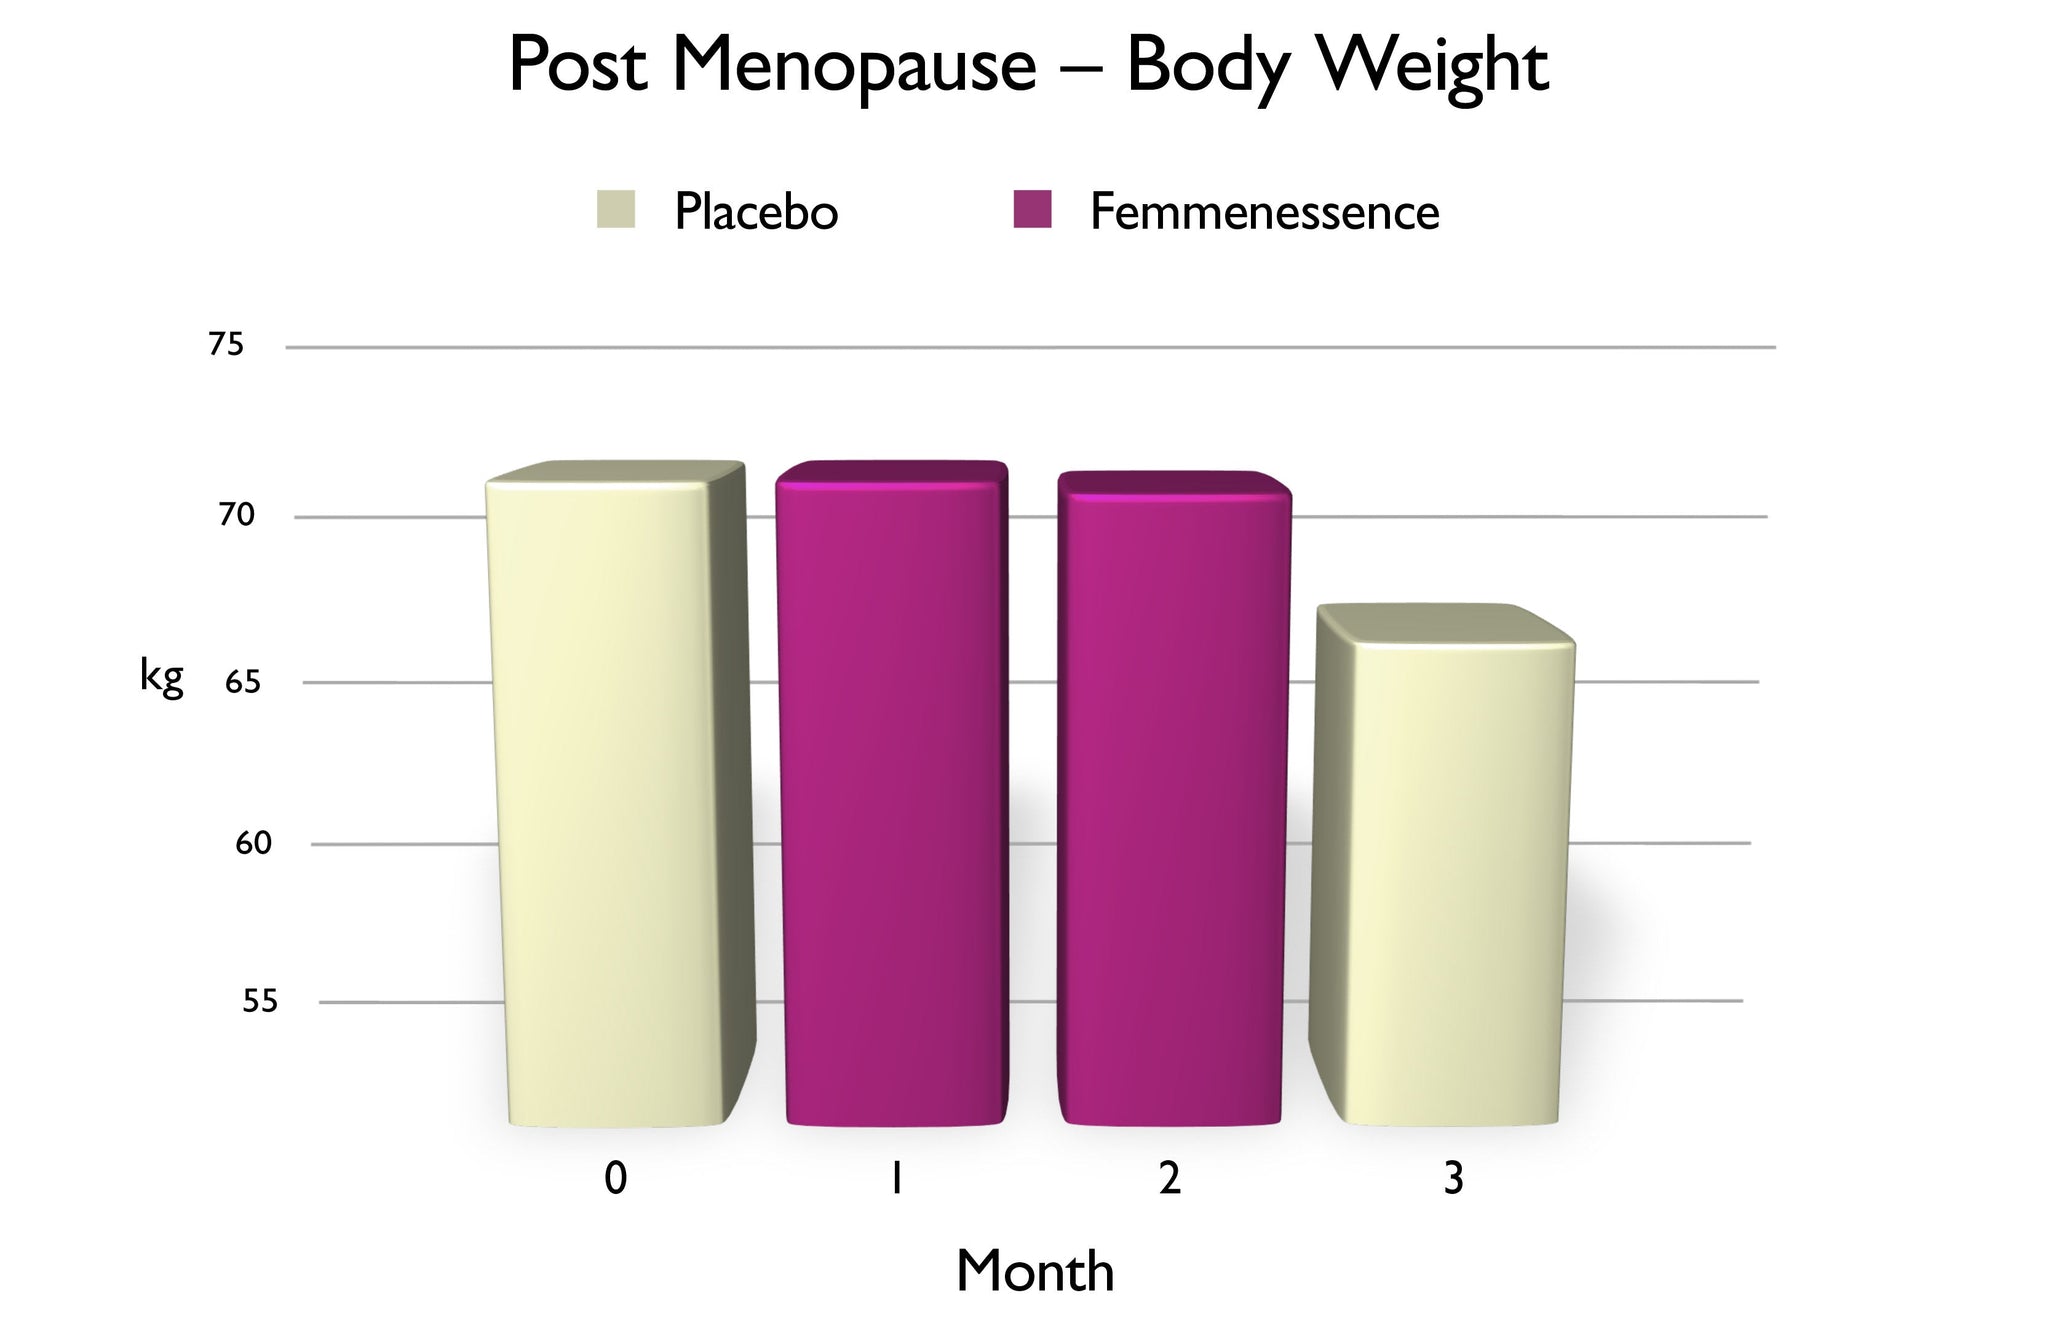 Chart of Post Menopause Body Weight, using Femmenessence vs. placebo, over three-month period